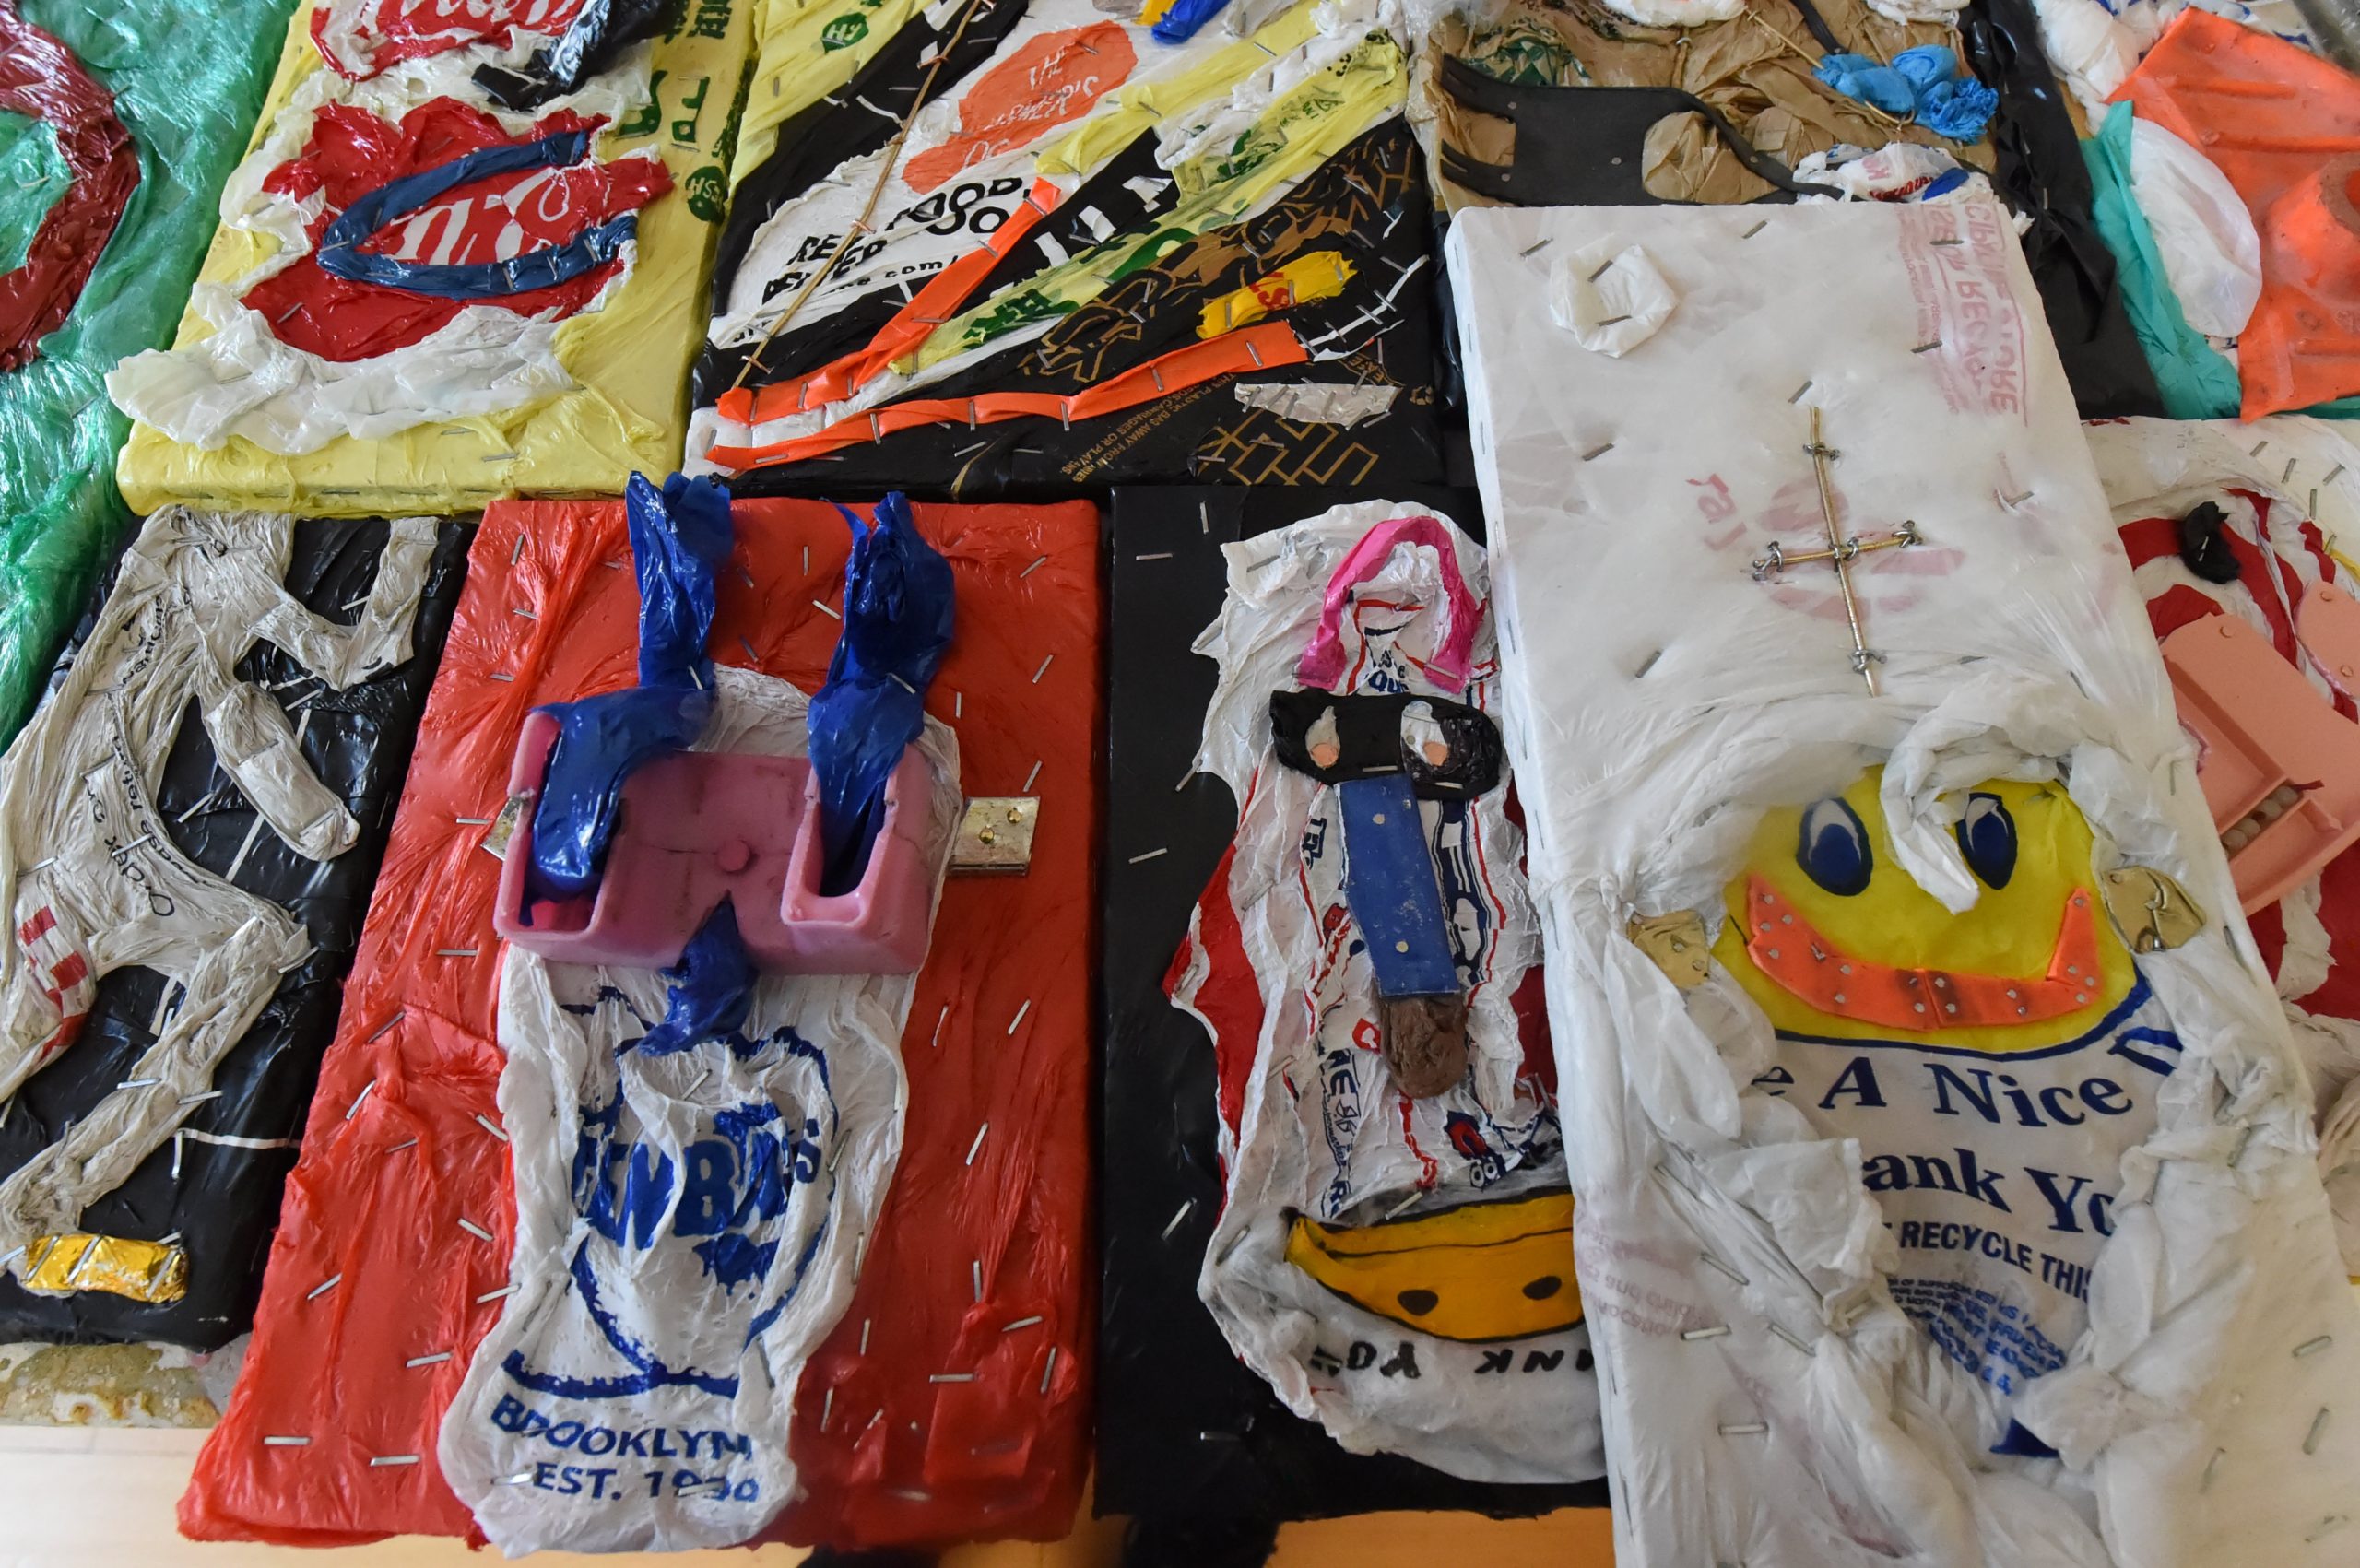 STYLING and EDITING by VM on X: Expo Plastic Bags in art and